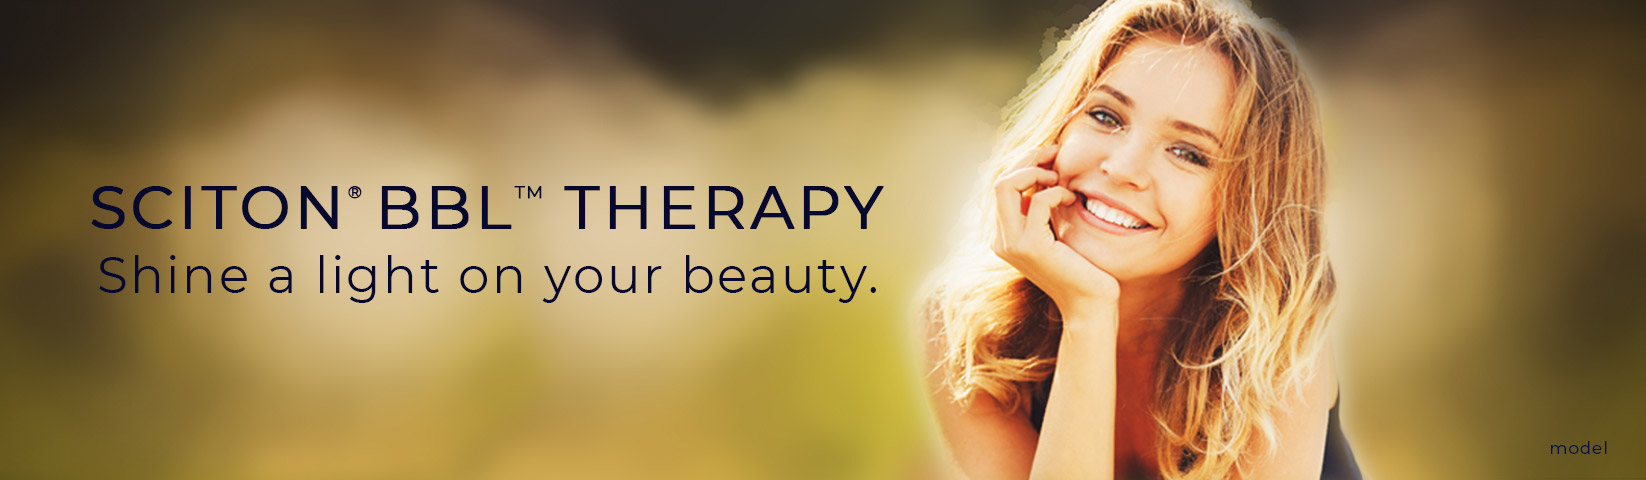 Sciton BBL Therapy: Shine a light on your beauty